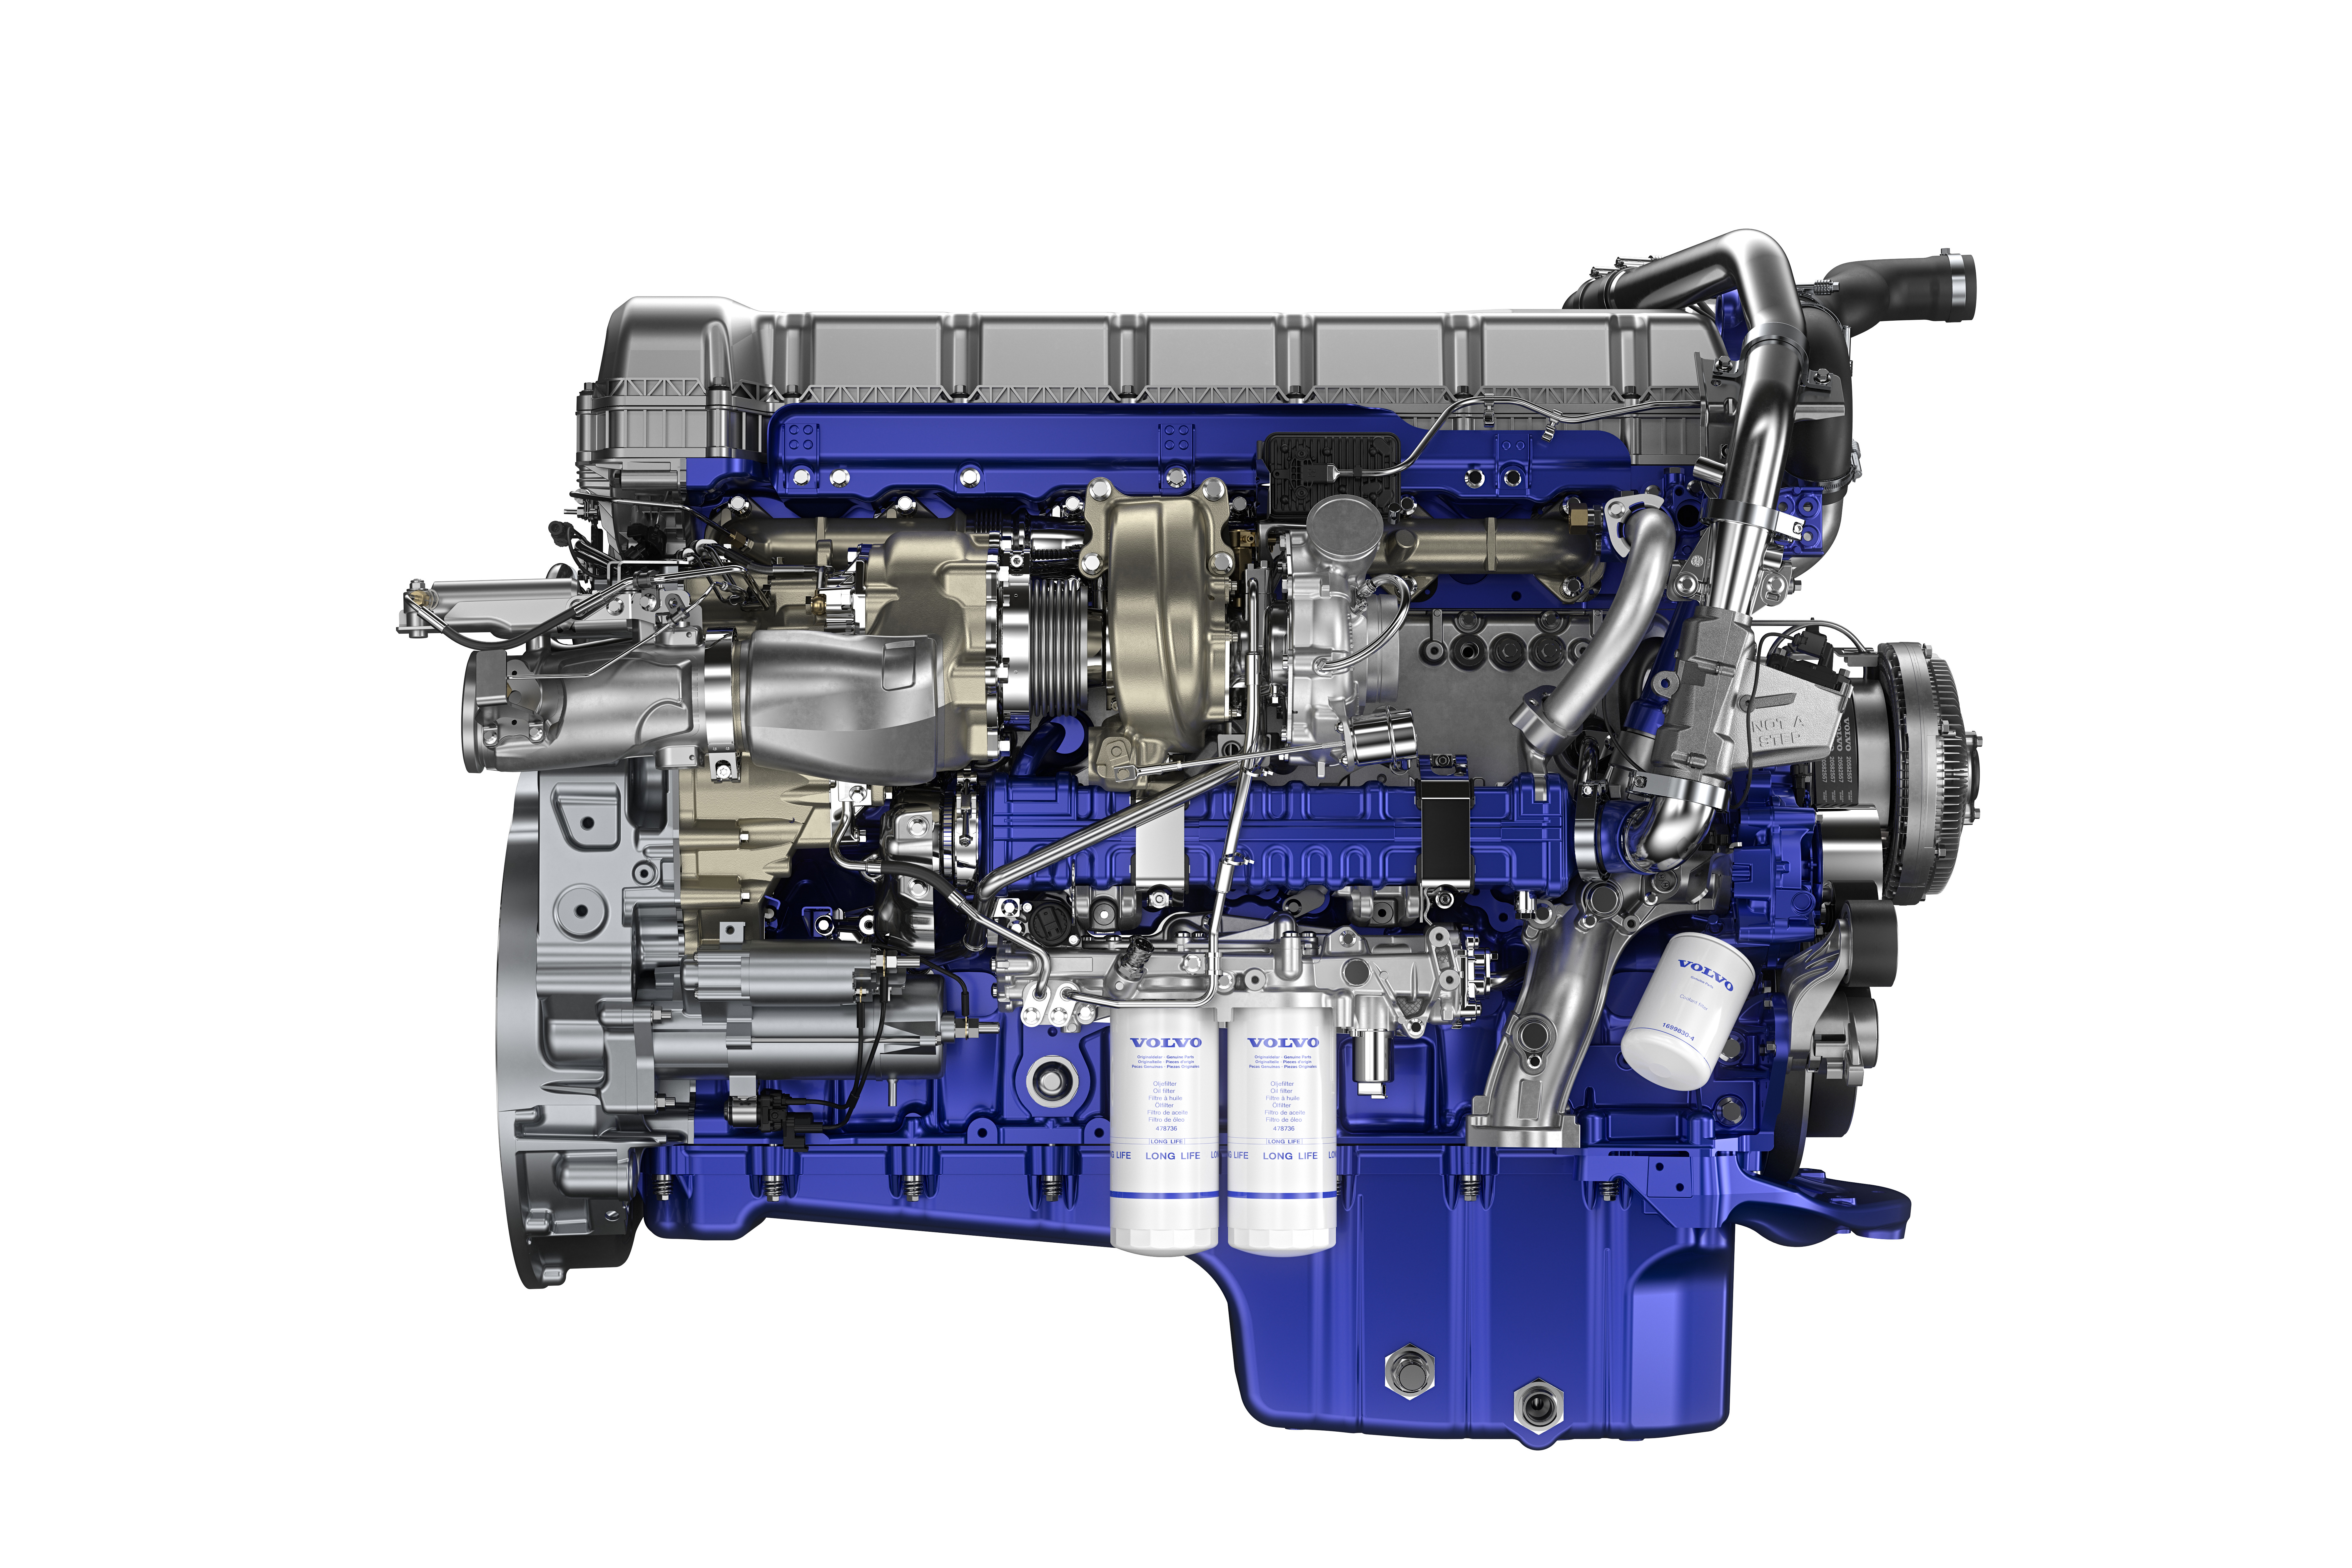 With Continued North American Success, Volvo Trucks’ D13 Turbo Compound Engine Now Standard on All VNL Models